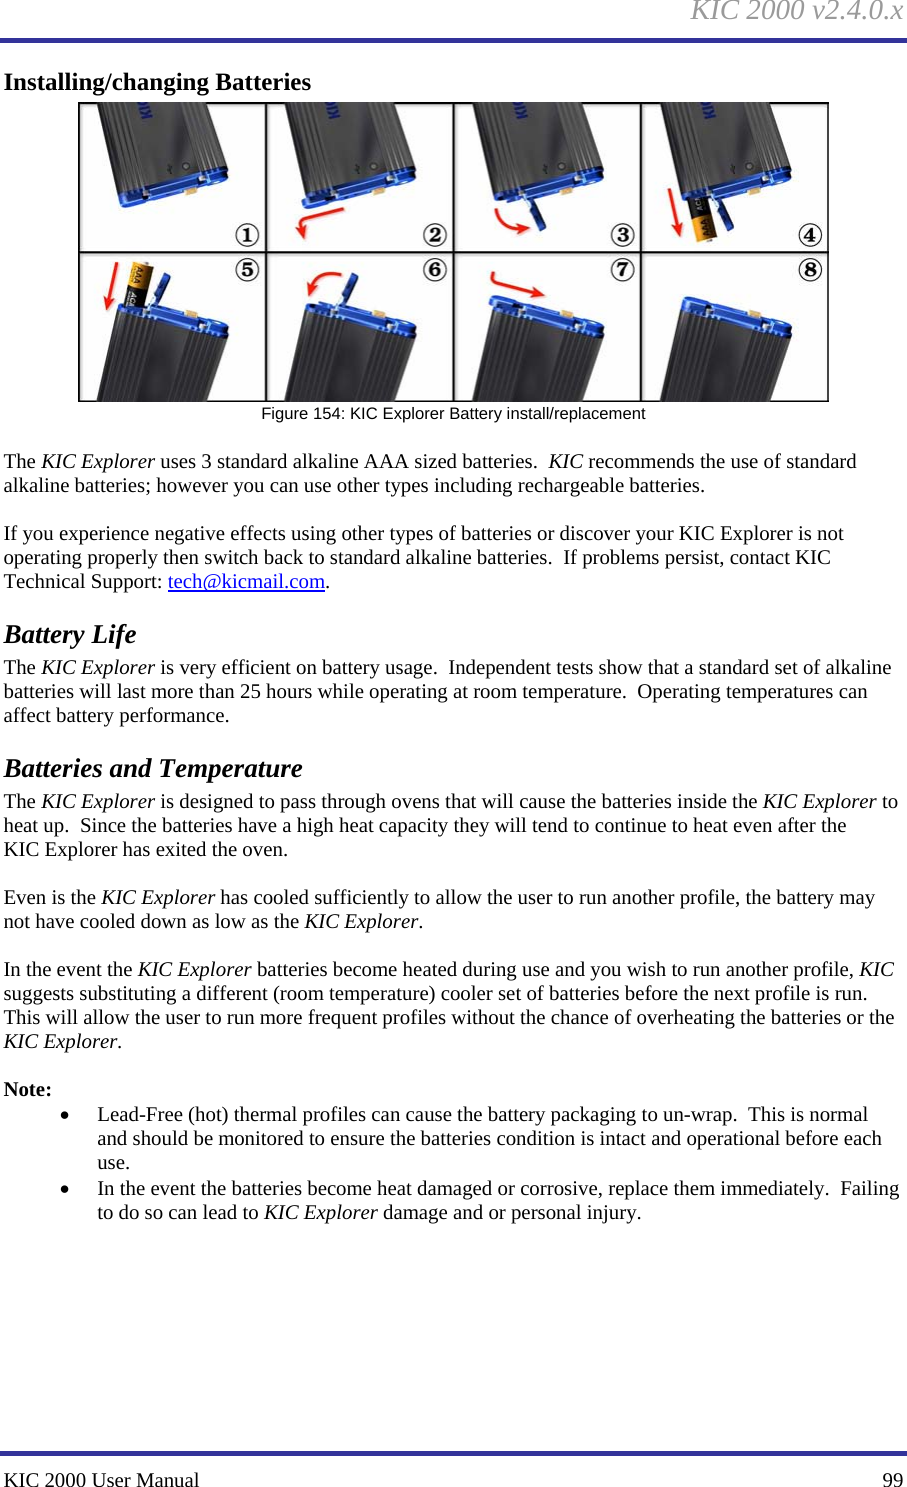 KIC 2000 v2.4.0.x KIC 2000 User Manual    99 Installing/changing Batteries  Figure 154: KIC Explorer Battery install/replacement  The KIC Explorer uses 3 standard alkaline AAA sized batteries.  KIC recommends the use of standard alkaline batteries; however you can use other types including rechargeable batteries.    If you experience negative effects using other types of batteries or discover your KIC Explorer is not operating properly then switch back to standard alkaline batteries.  If problems persist, contact KIC Technical Support: tech@kicmail.com.   Battery Life The KIC Explorer is very efficient on battery usage.  Independent tests show that a standard set of alkaline batteries will last more than 25 hours while operating at room temperature.  Operating temperatures can affect battery performance.   Batteries and Temperature The KIC Explorer is designed to pass through ovens that will cause the batteries inside the KIC Explorer to heat up.  Since the batteries have a high heat capacity they will tend to continue to heat even after the KIC Explorer has exited the oven.    Even is the KIC Explorer has cooled sufficiently to allow the user to run another profile, the battery may not have cooled down as low as the KIC Explorer.    In the event the KIC Explorer batteries become heated during use and you wish to run another profile, KIC suggests substituting a different (room temperature) cooler set of batteries before the next profile is run.  This will allow the user to run more frequent profiles without the chance of overheating the batteries or the KIC Explorer.    Note: • Lead-Free (hot) thermal profiles can cause the battery packaging to un-wrap.  This is normal and should be monitored to ensure the batteries condition is intact and operational before each use.   • In the event the batteries become heat damaged or corrosive, replace them immediately.  Failing to do so can lead to KIC Explorer damage and or personal injury.      